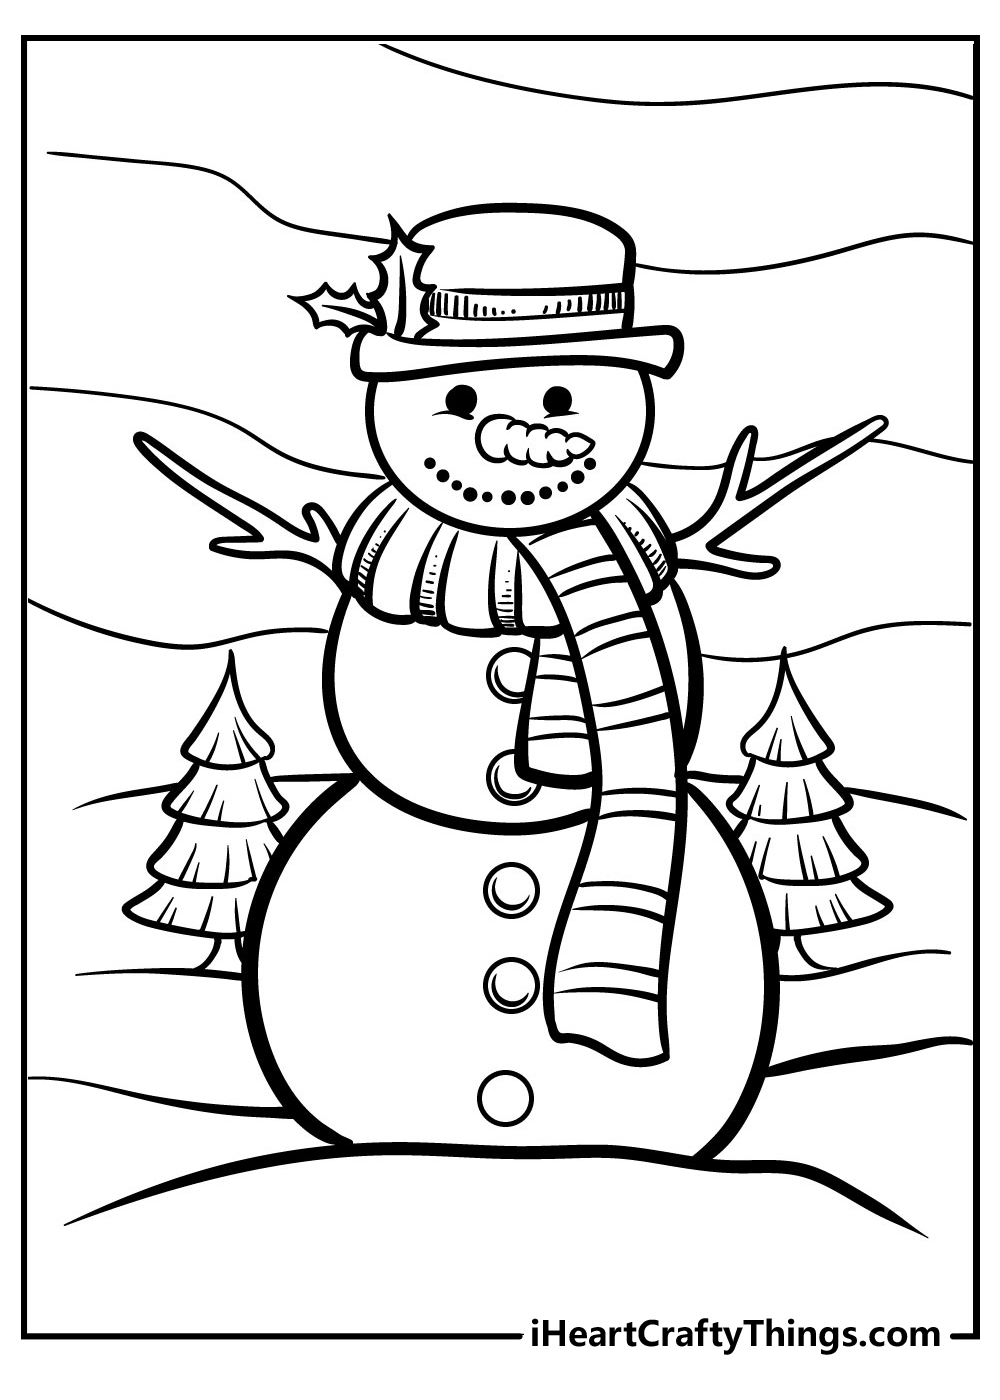 Snowman Coloring Pages Updated 2021 